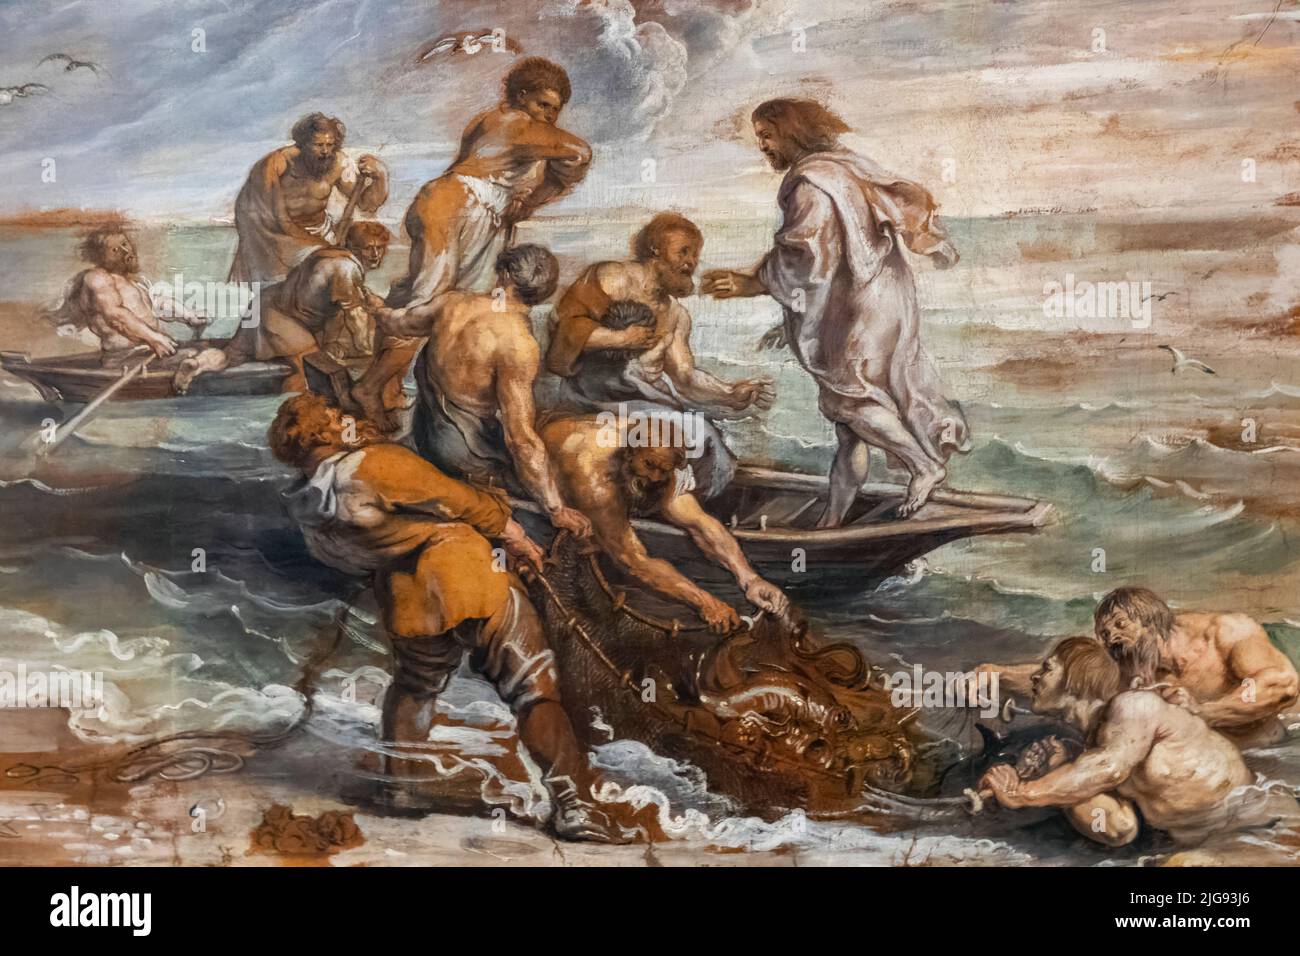 Painting titled 'The Miraculous Draught of Fishes' by Flemish Artist Peter Paul Rubens dated 1618 Stock Photo